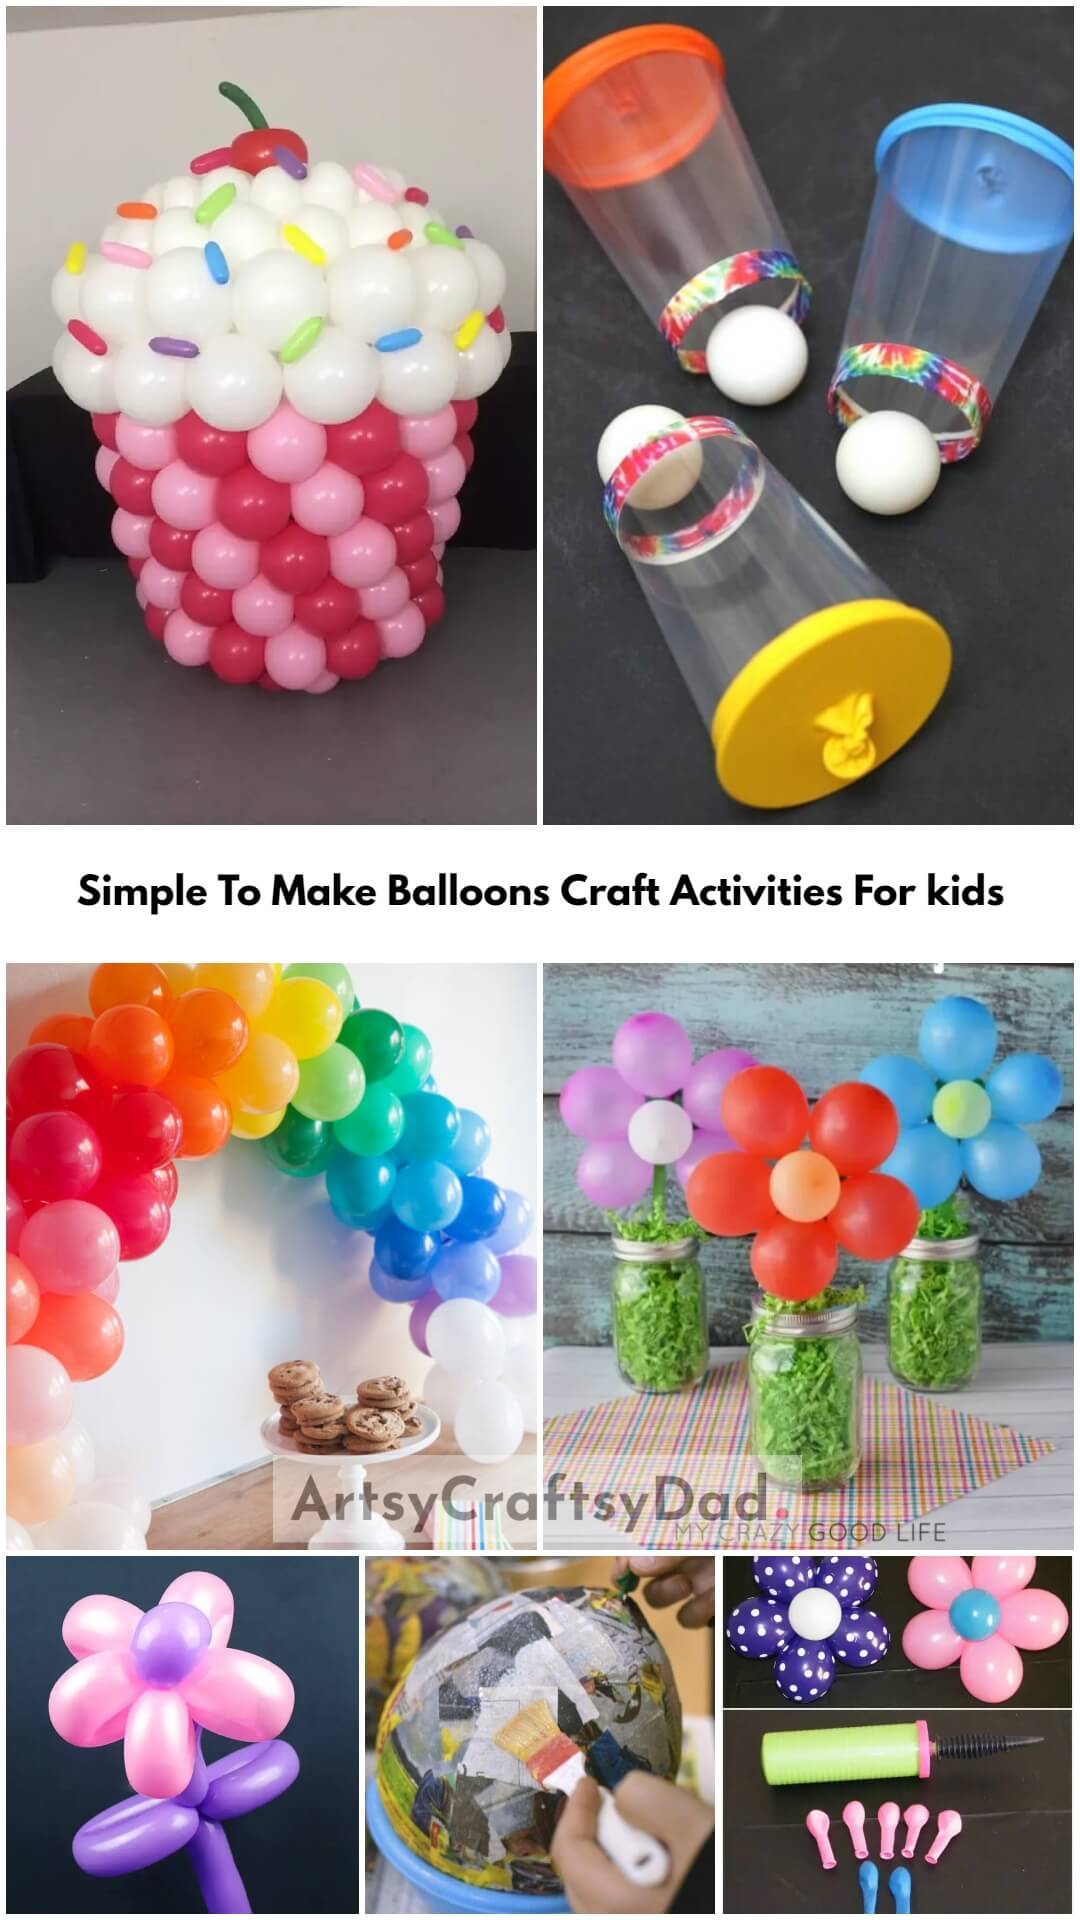 Simple To Make Balloons Craft Activities For kids